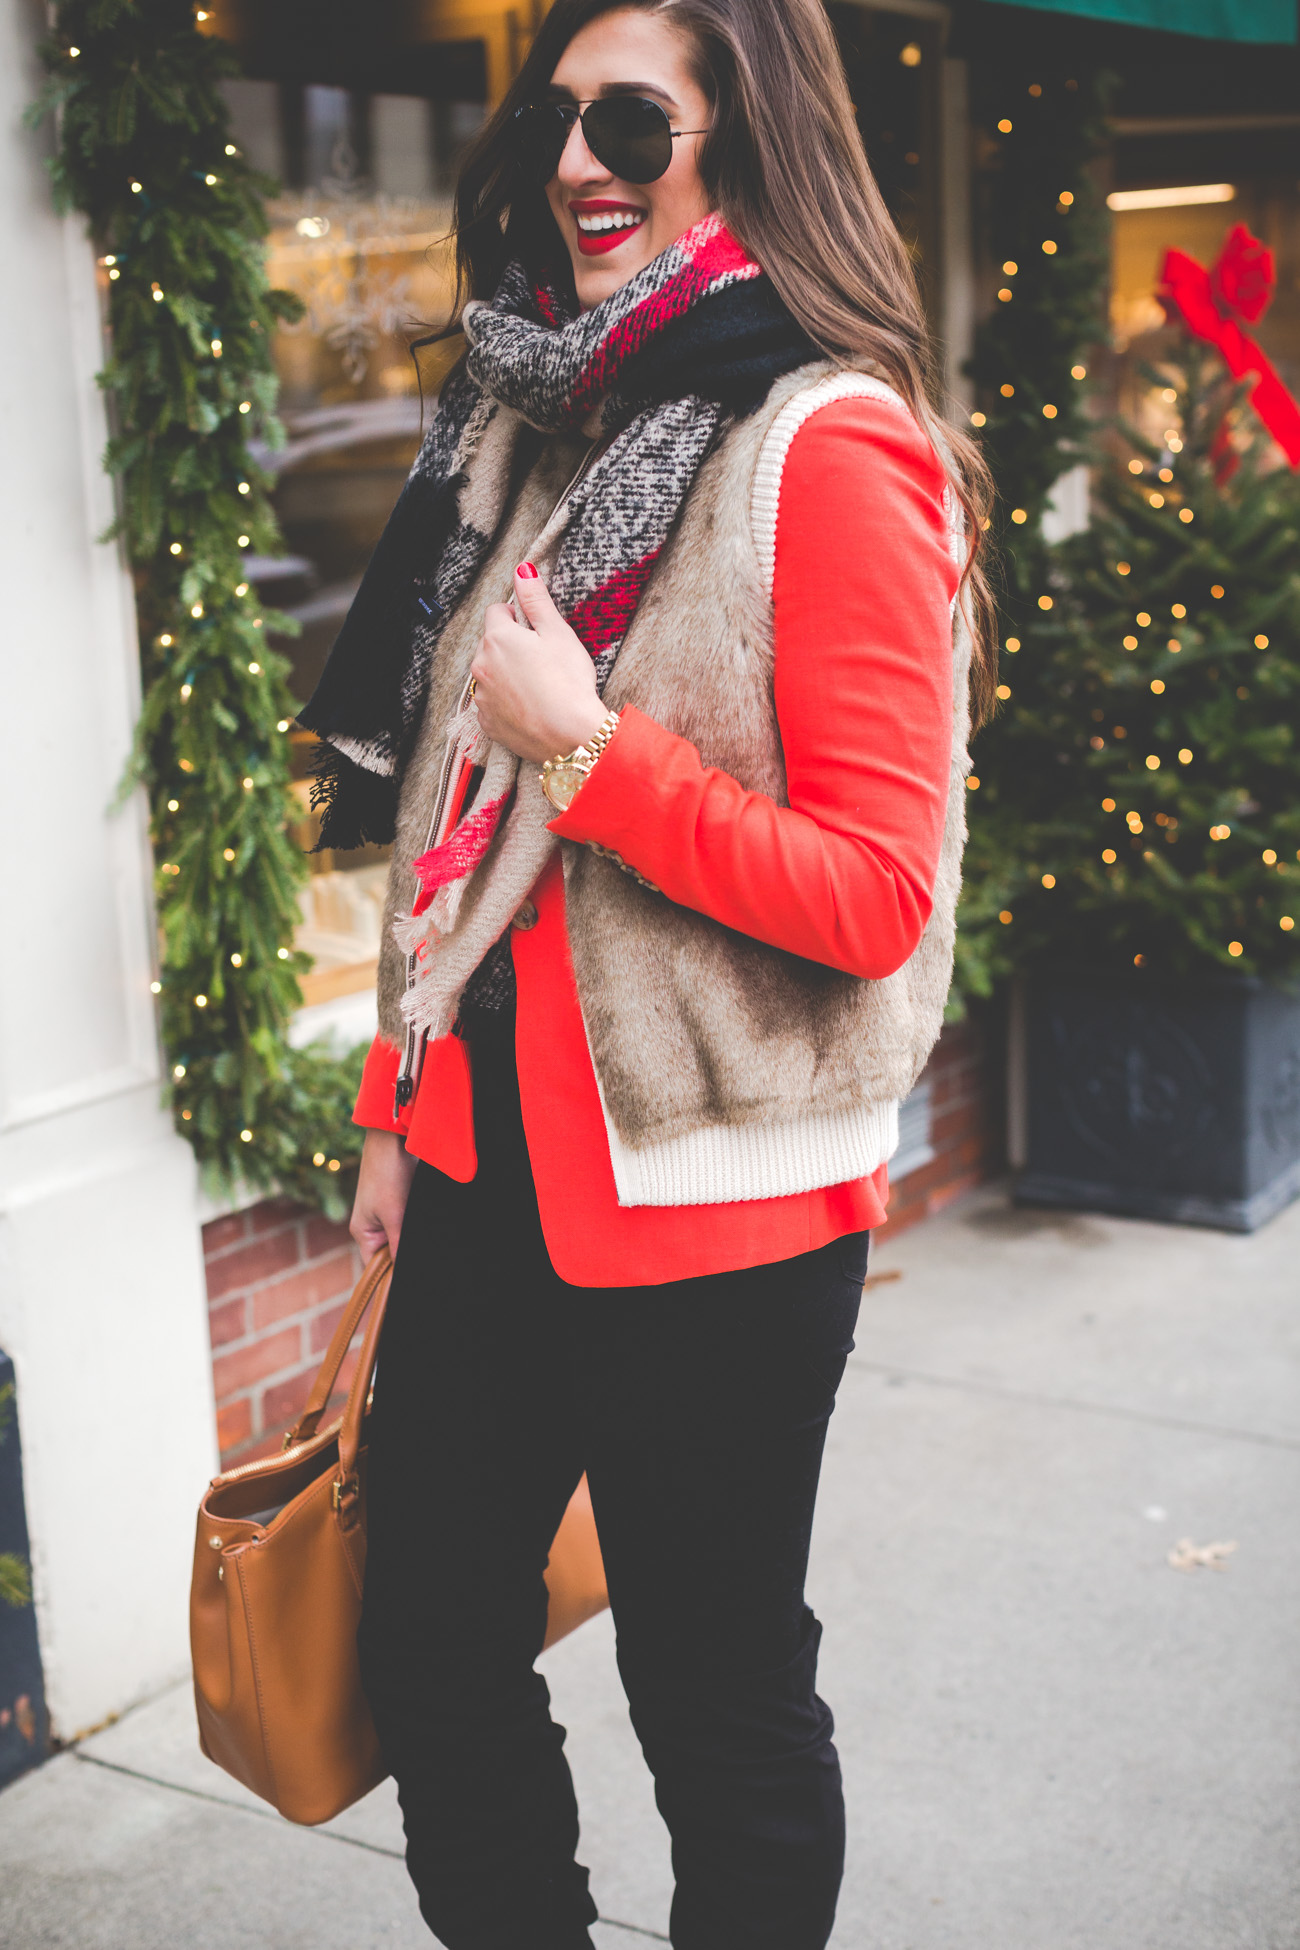 regent blazer, red blazer, blanket scarf,  faux fur vest, over the knee boots, tory burch robinson tote, black ray-ban aviators, woodstock vermont, holiday style, holiday fashion, holiday outfit ideas // grace wainwright from a southern drawl